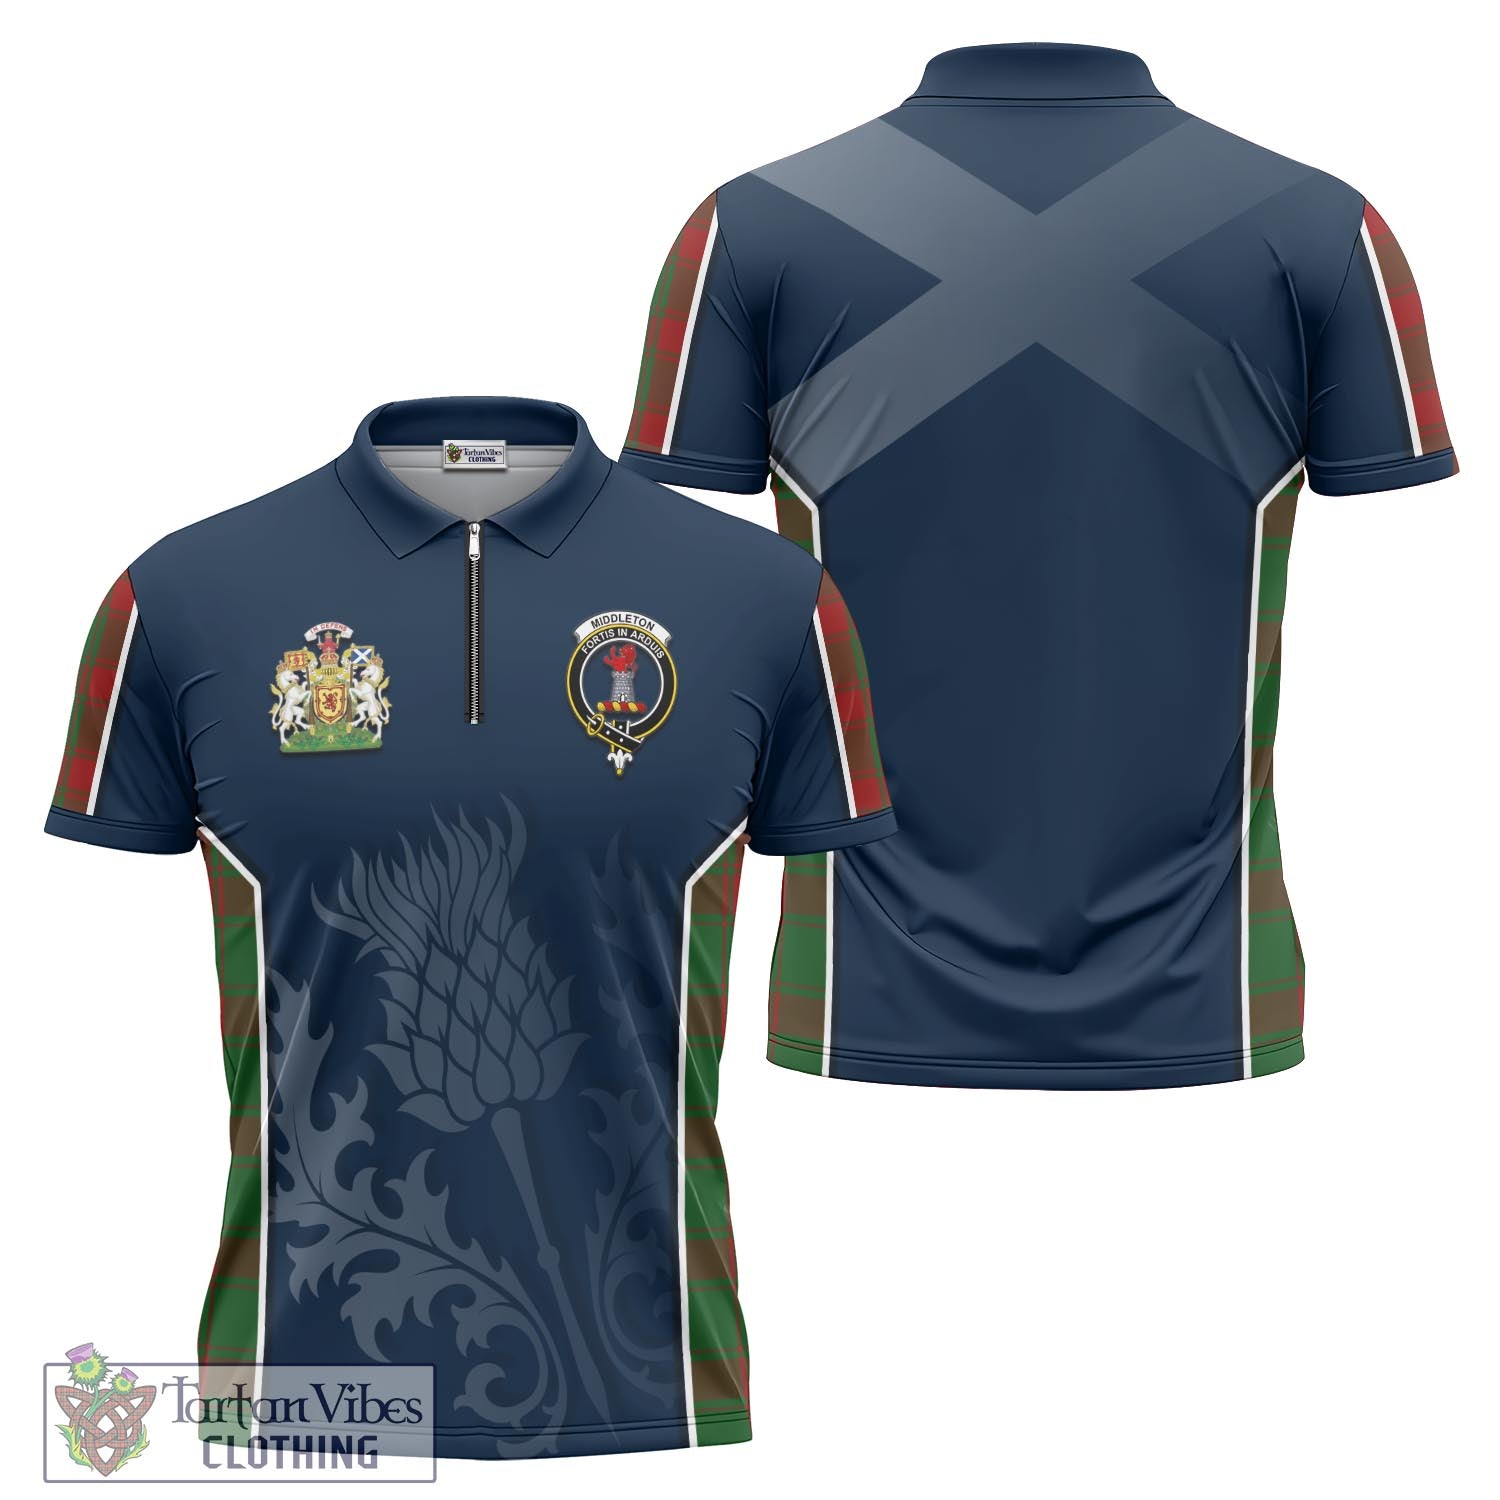 Tartan Vibes Clothing Middleton Tartan Zipper Polo Shirt with Family Crest and Scottish Thistle Vibes Sport Style